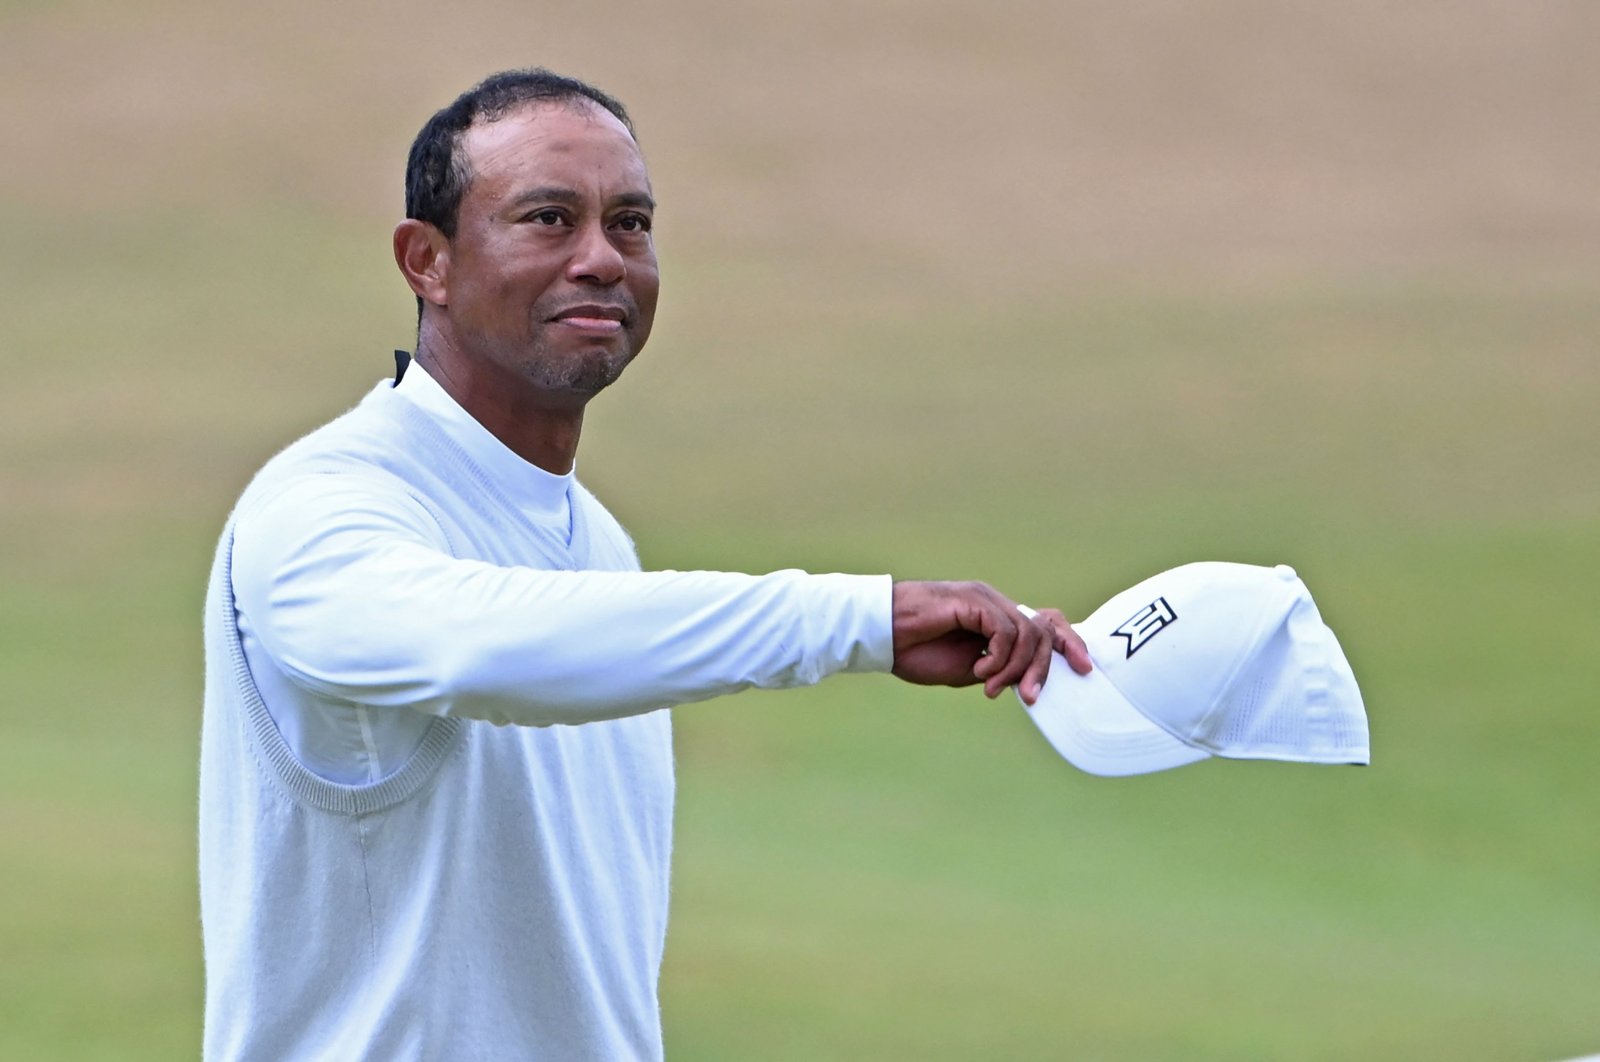 U.S. golfer Tiger Woods at the 150th British Open, St. Andrews, Scotland, July 15, 2022. (AFP Photo)